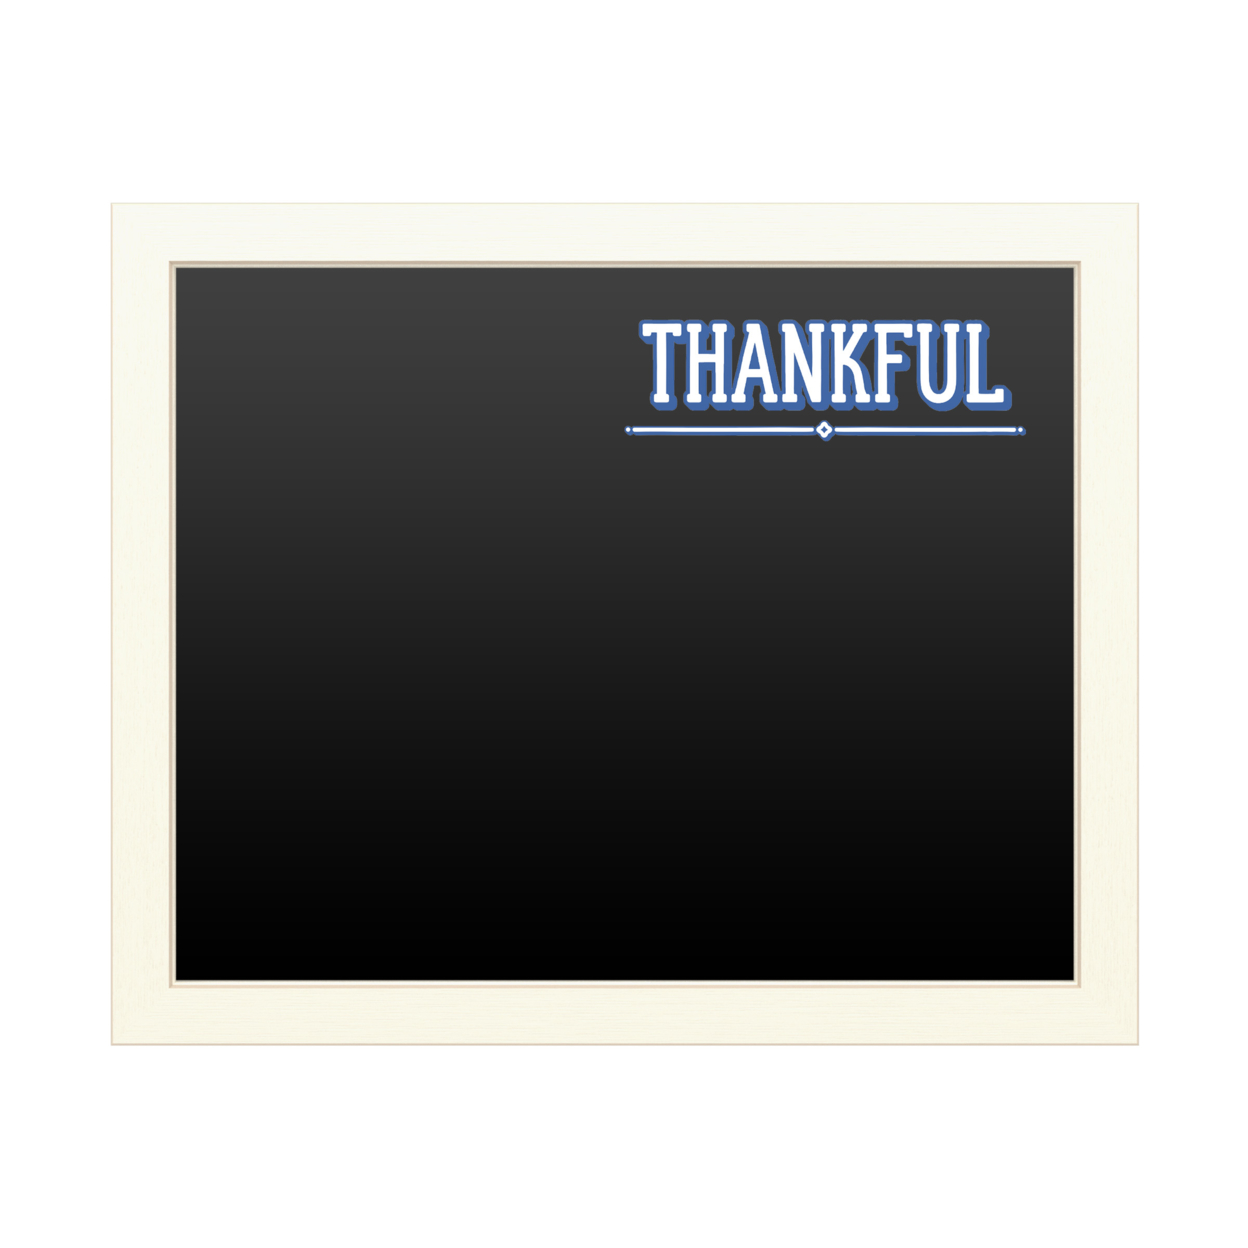 16 X 20 Chalk Board With Printed Artwork - Thankful Blue White Board - Ready To Hang Chalkboard